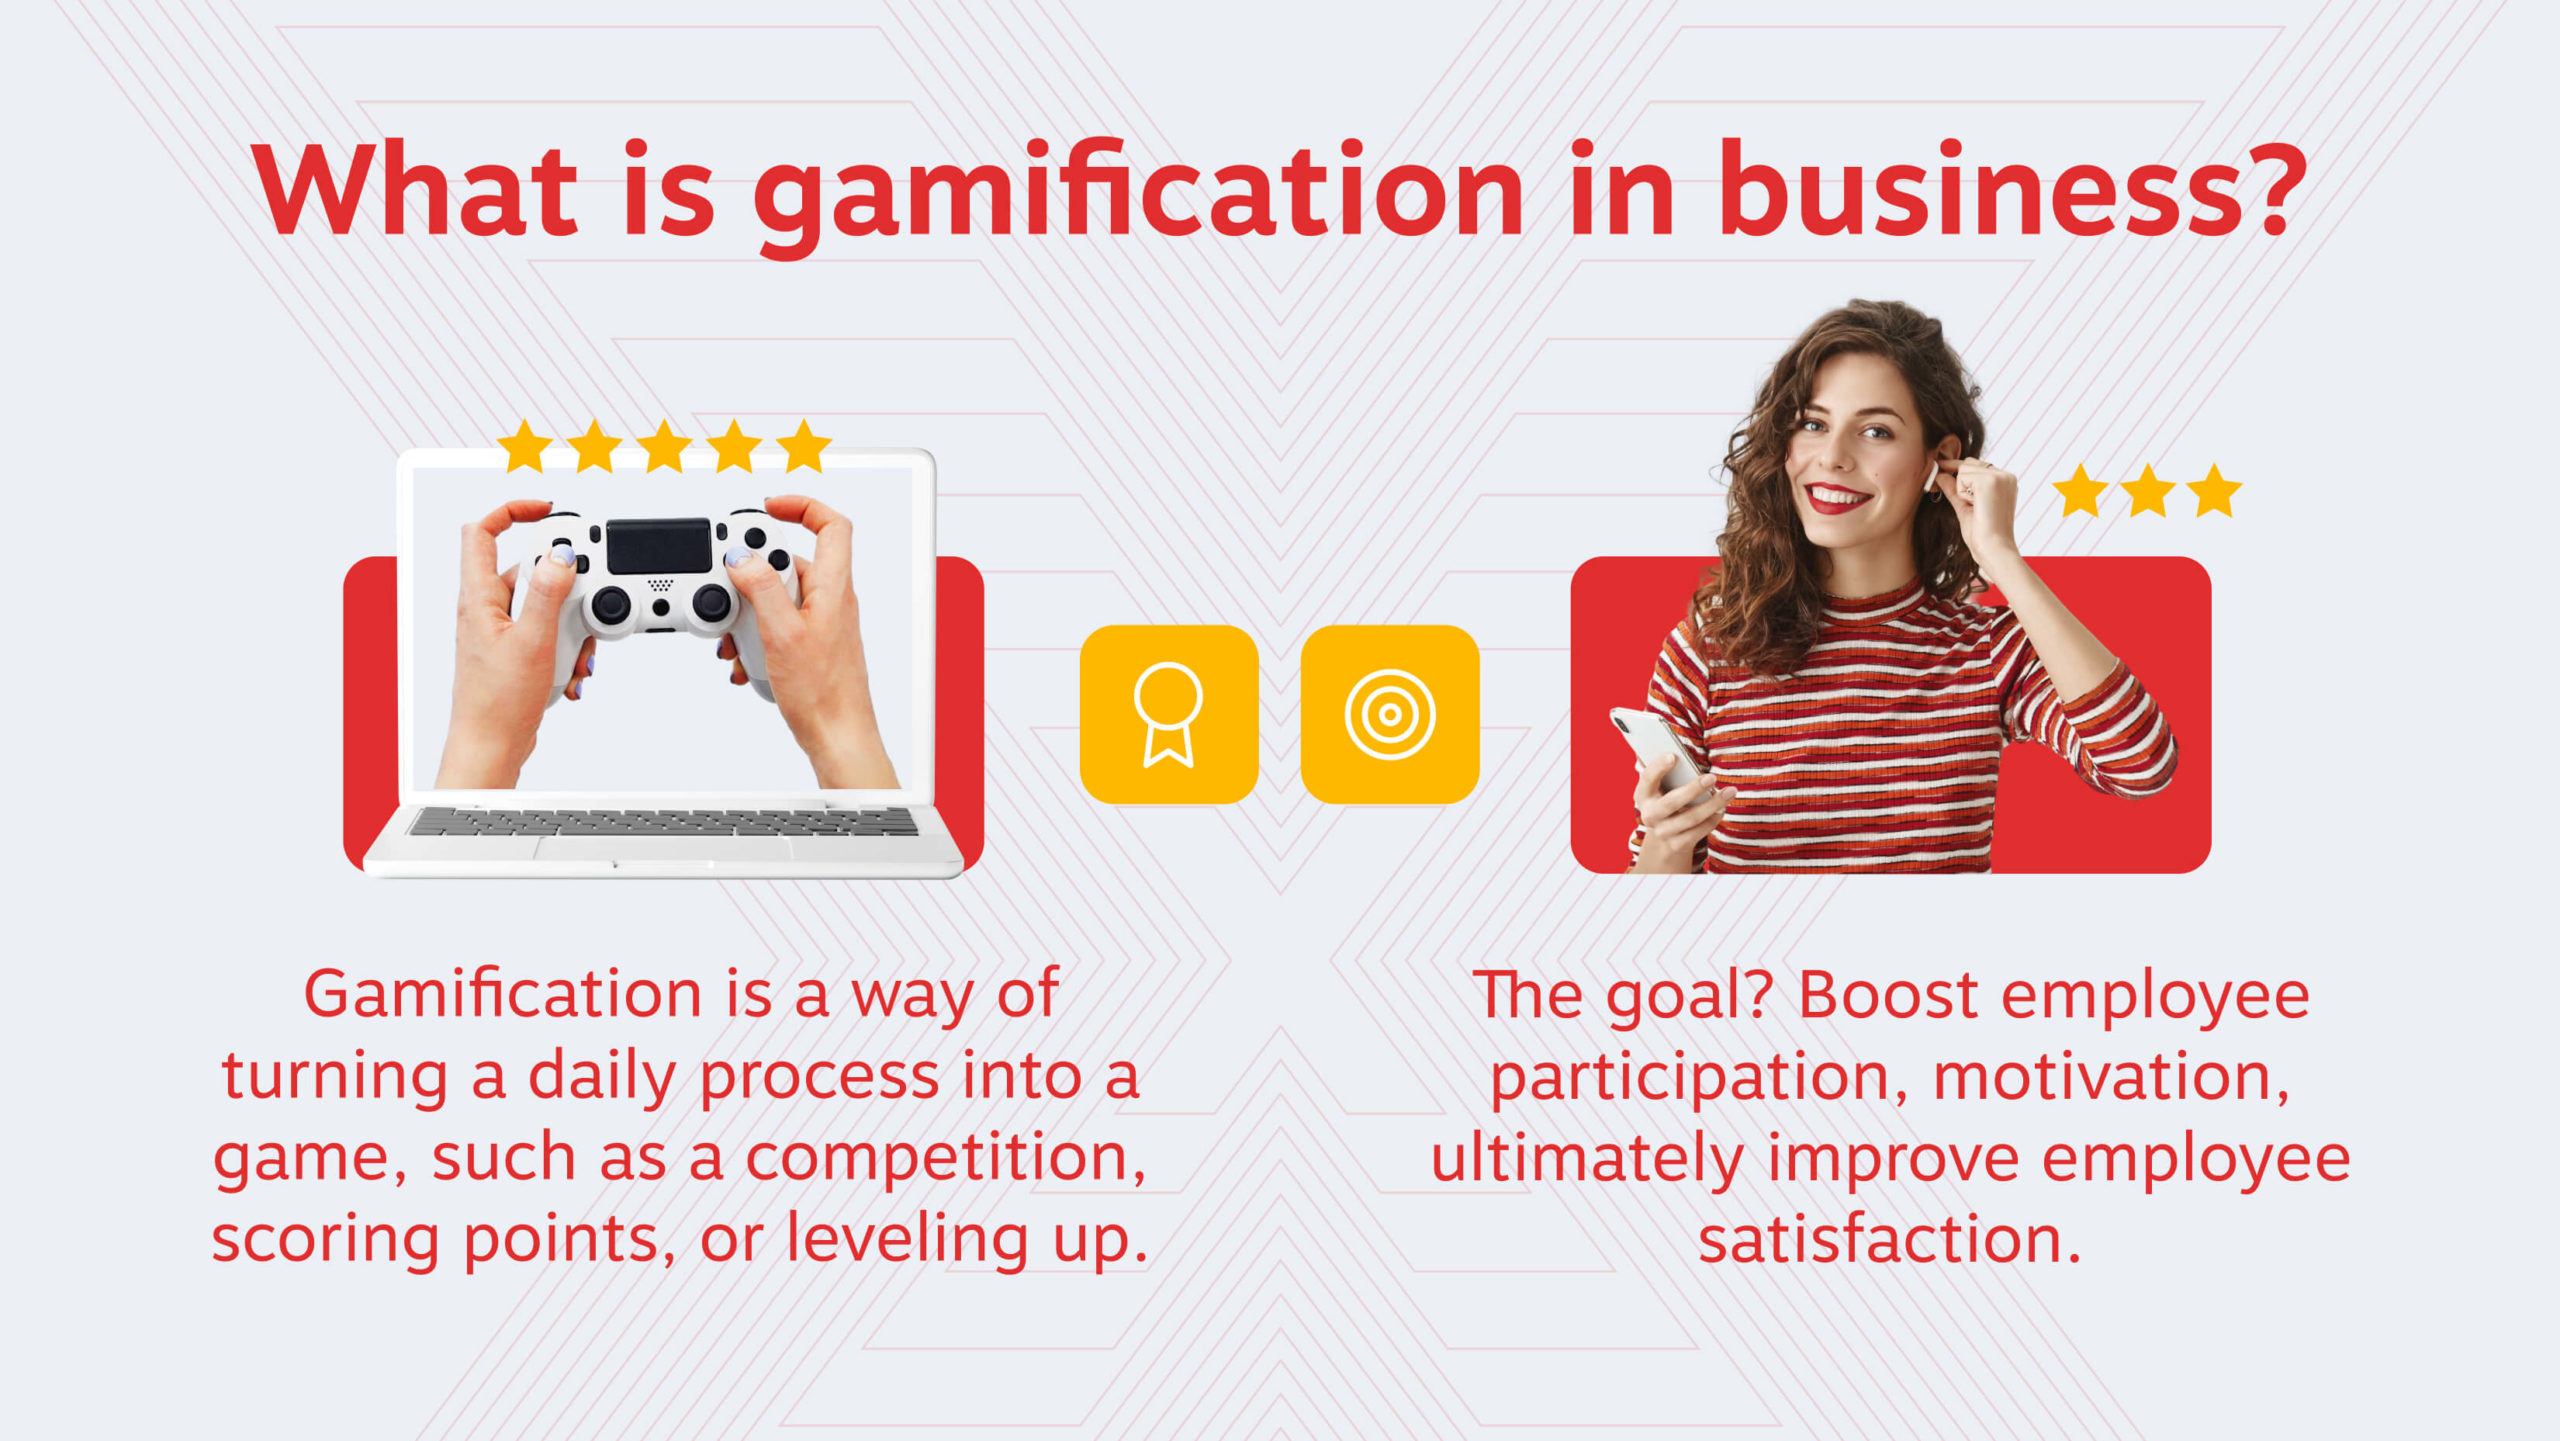 Gamification is a way of turning a daily process into a game, such as a competition, scoring points, or leveling up.  The goal? Boost employee participation, motivation, ultimately improve employee satisfaction.